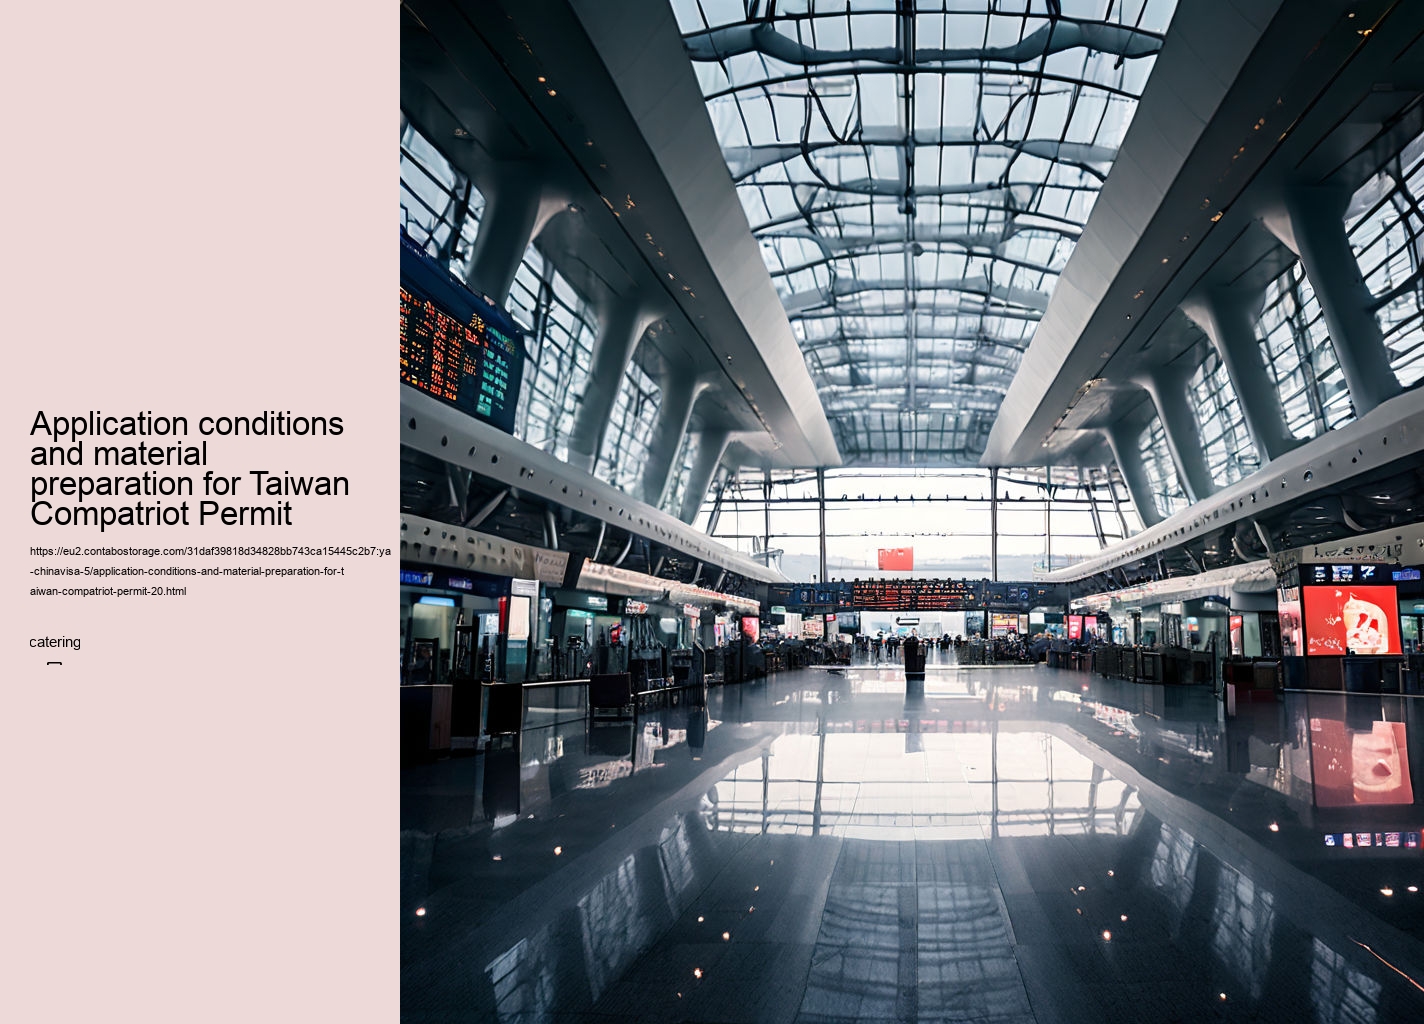 Application conditions and material preparation for Taiwan Compatriot Permit